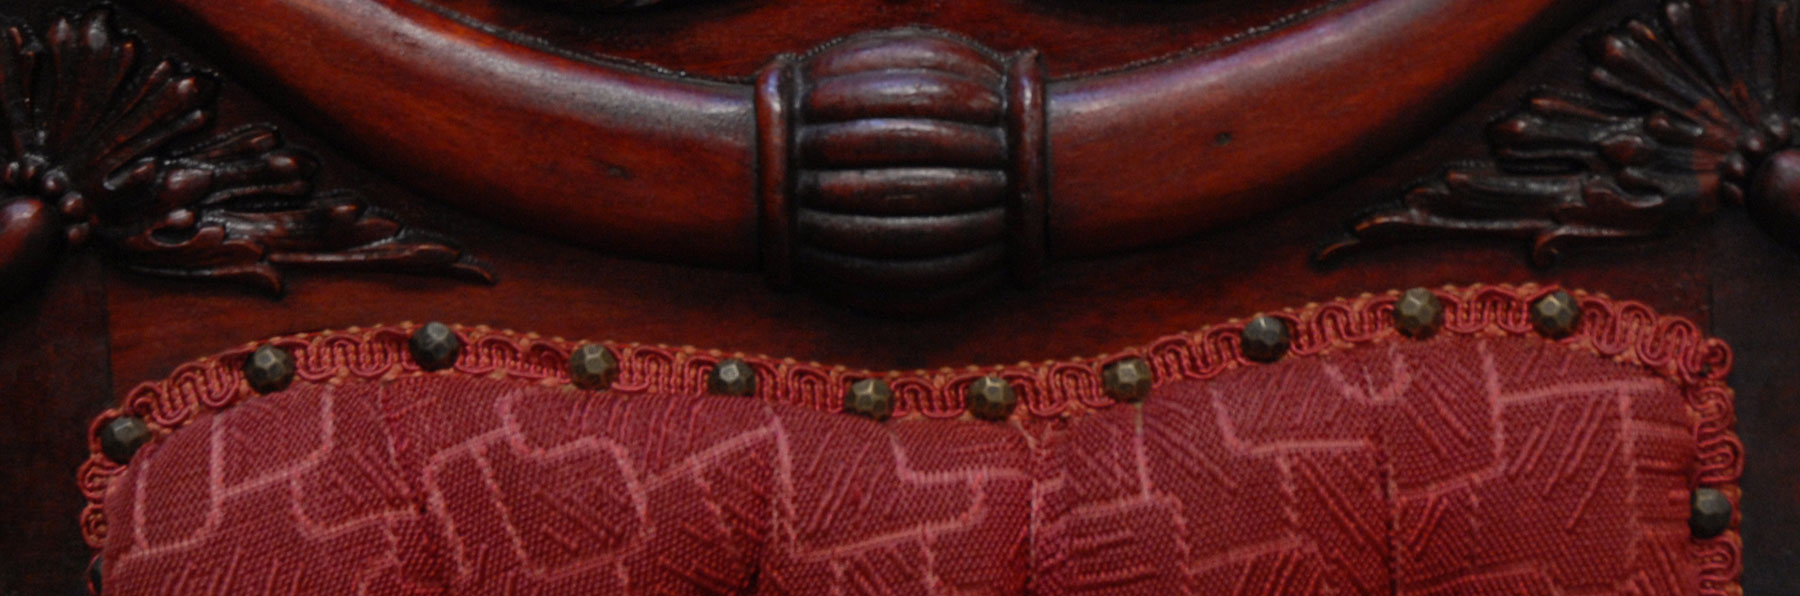 detailed view of upholstery